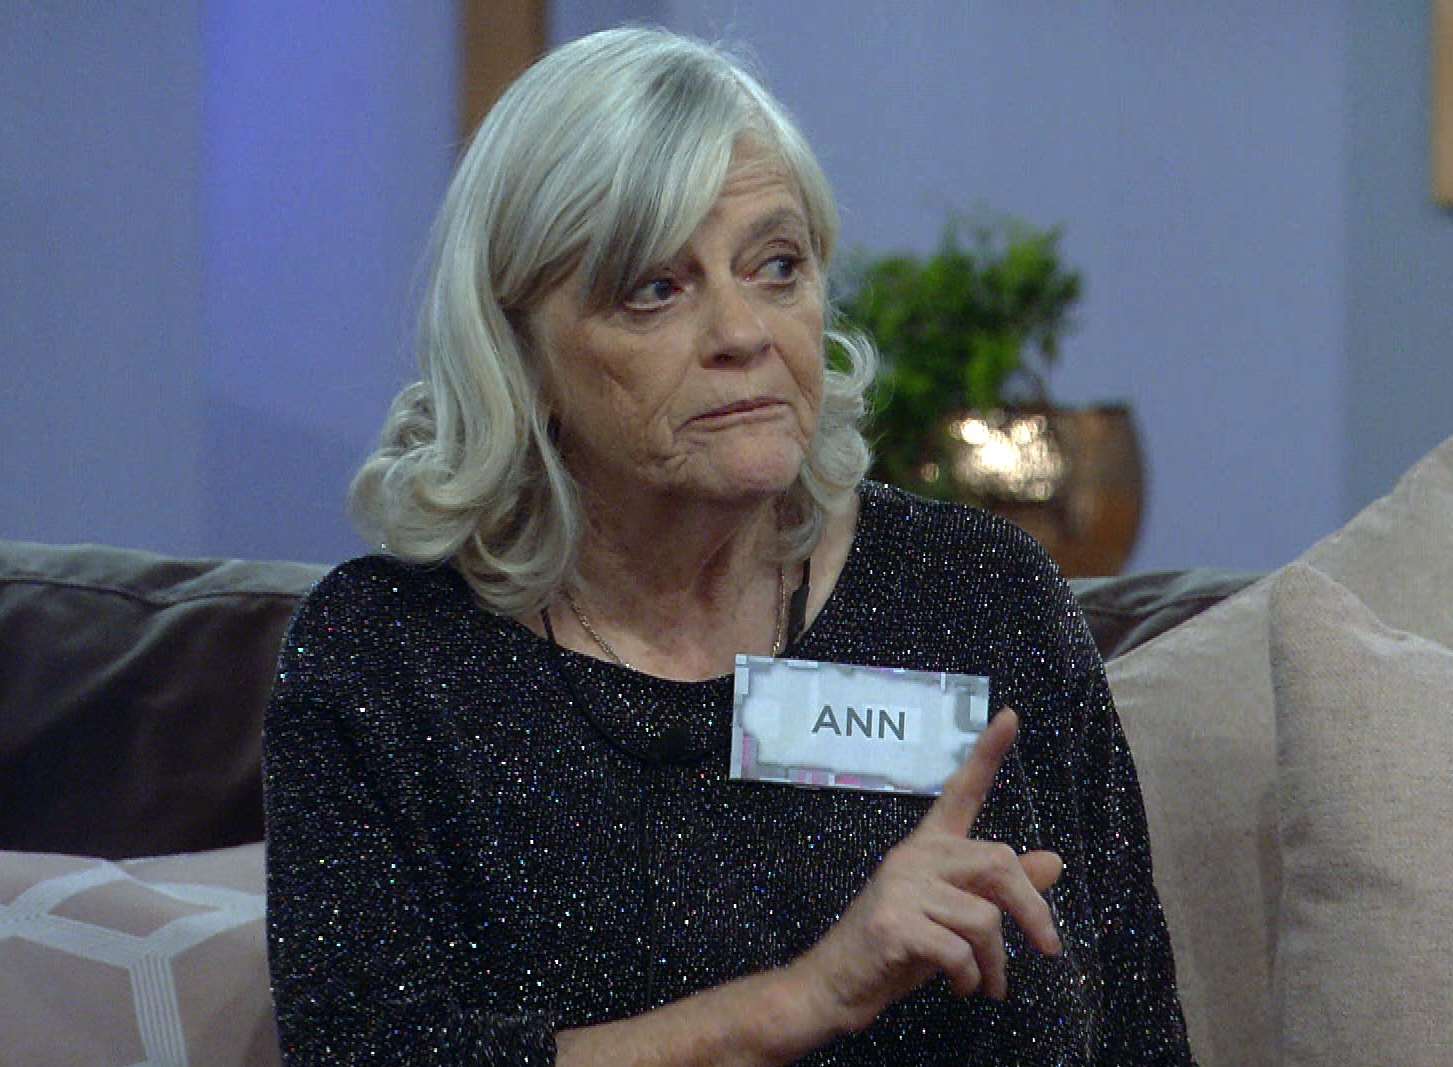 Wolf whistling 'a compliment' says Ann Widdecombe.